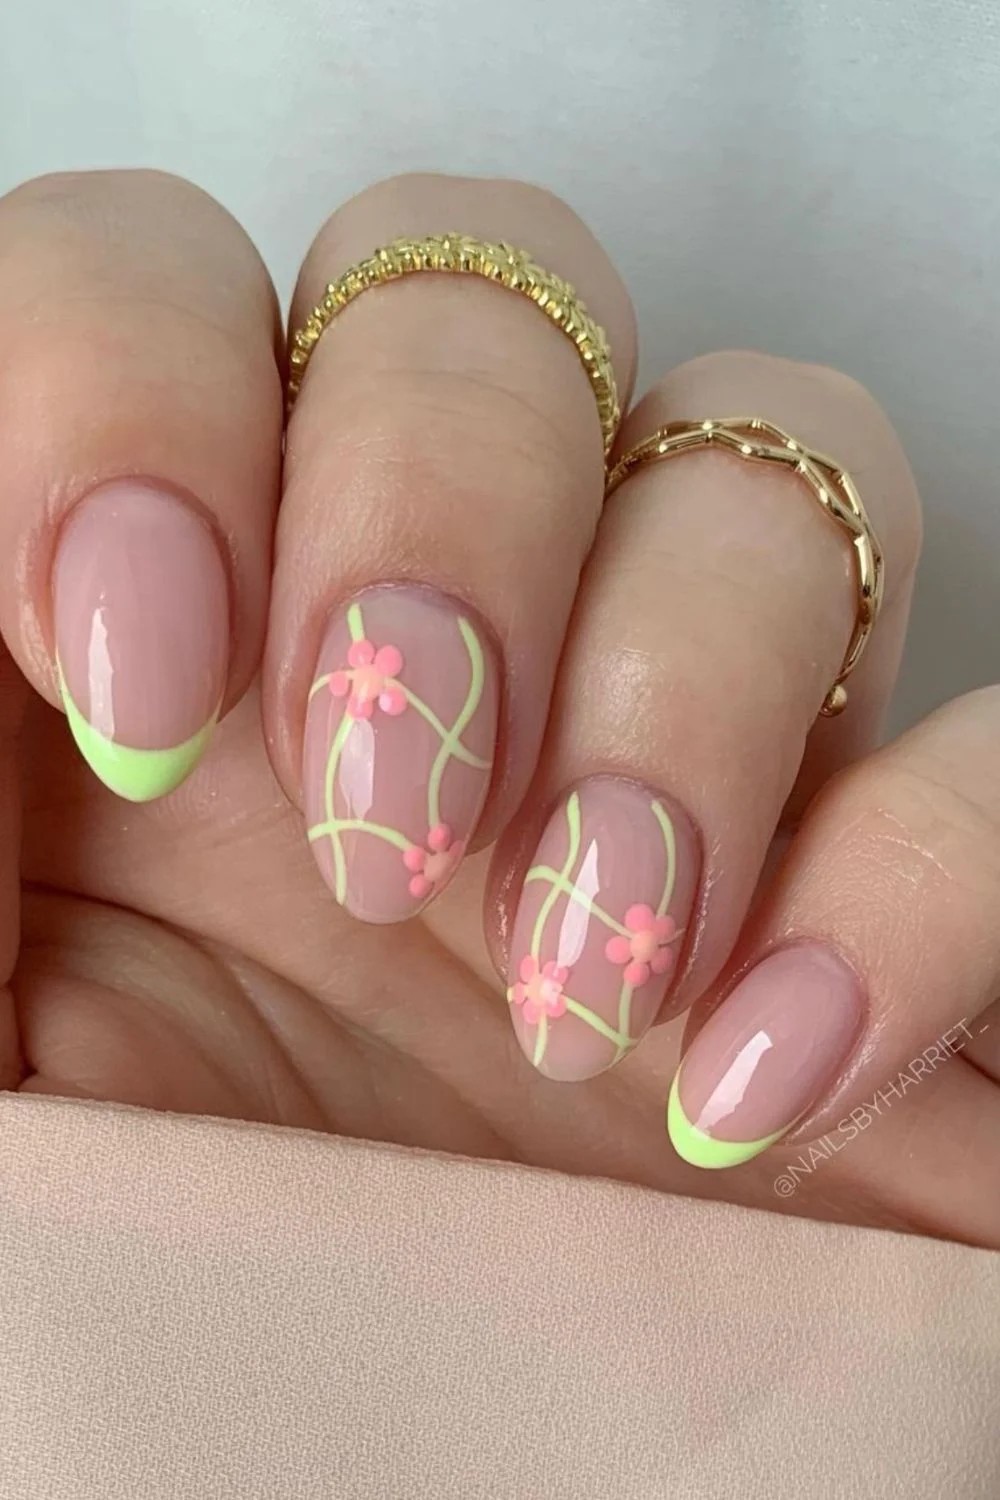 Neon French Tips with Peach Blossoms